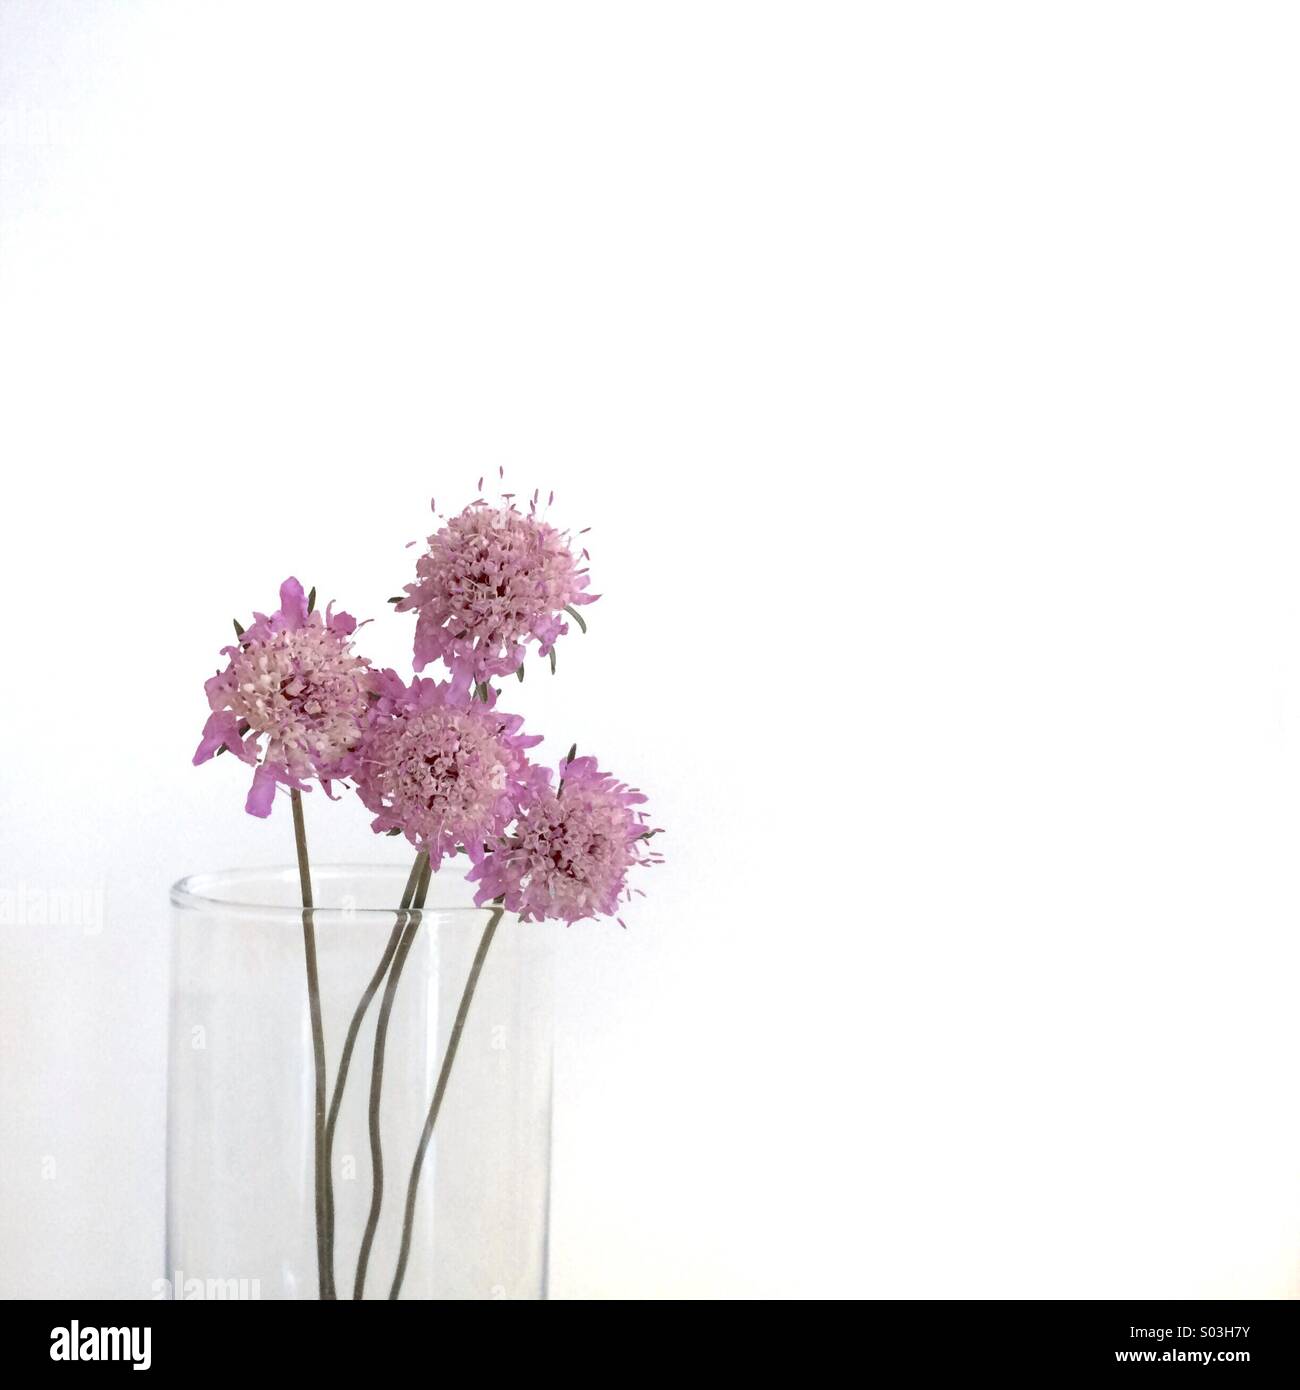 Capture of a glass with four pincushion flowers. Stock Photo